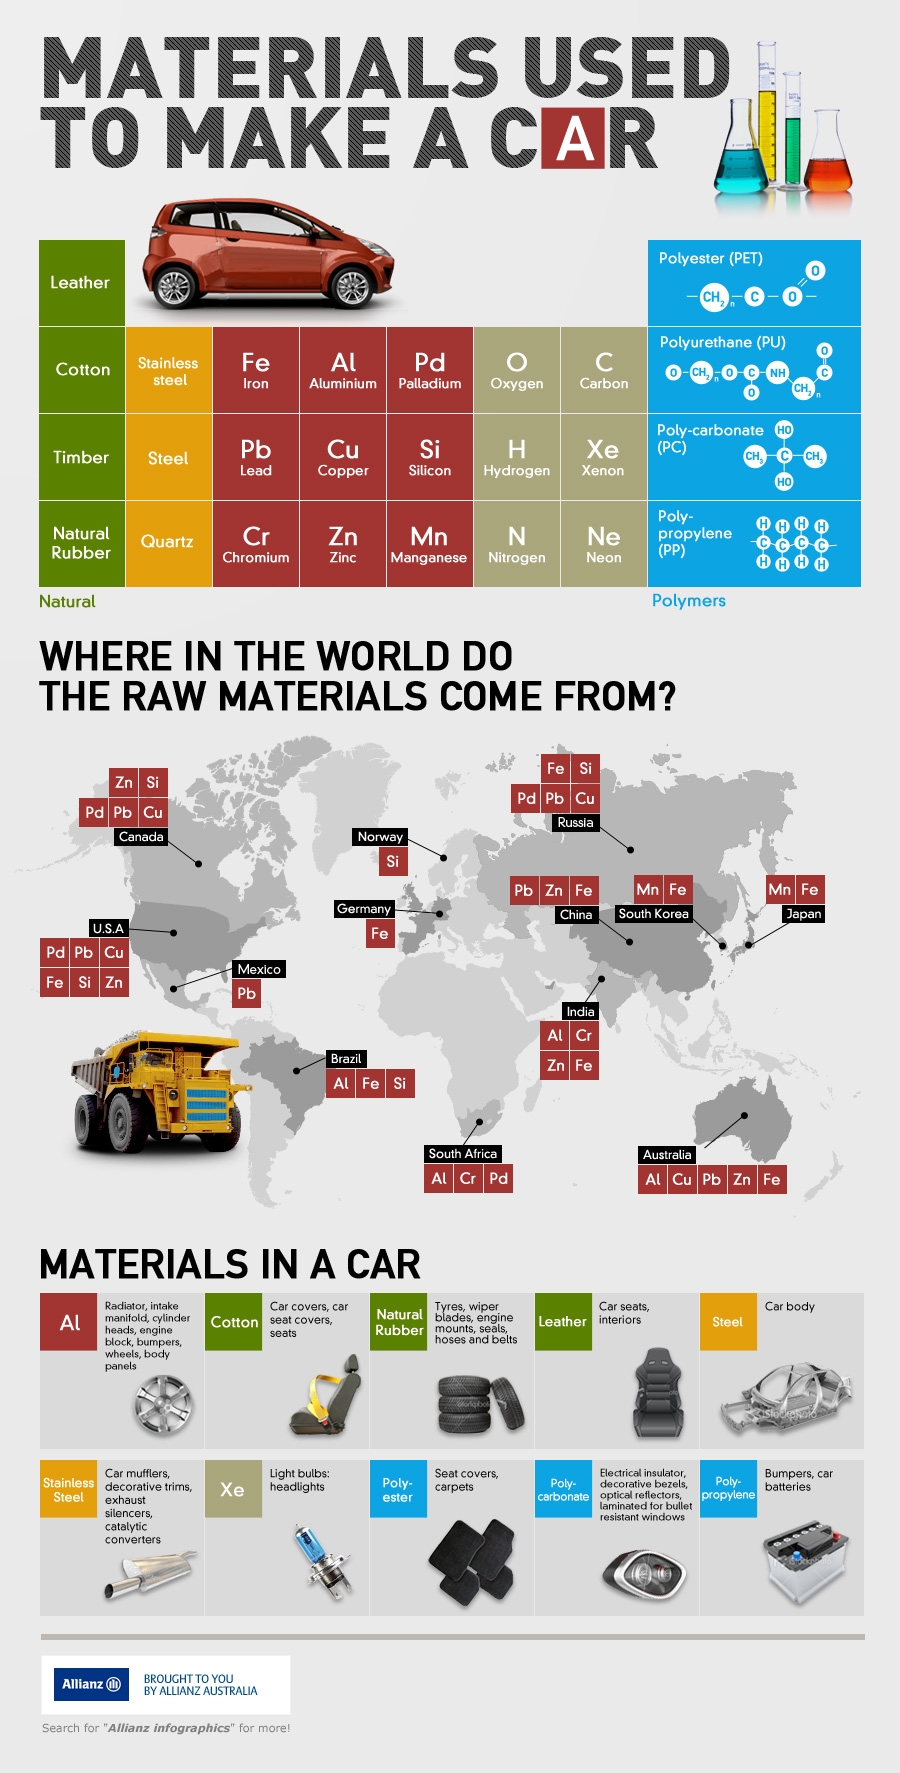 Materials used to make a car